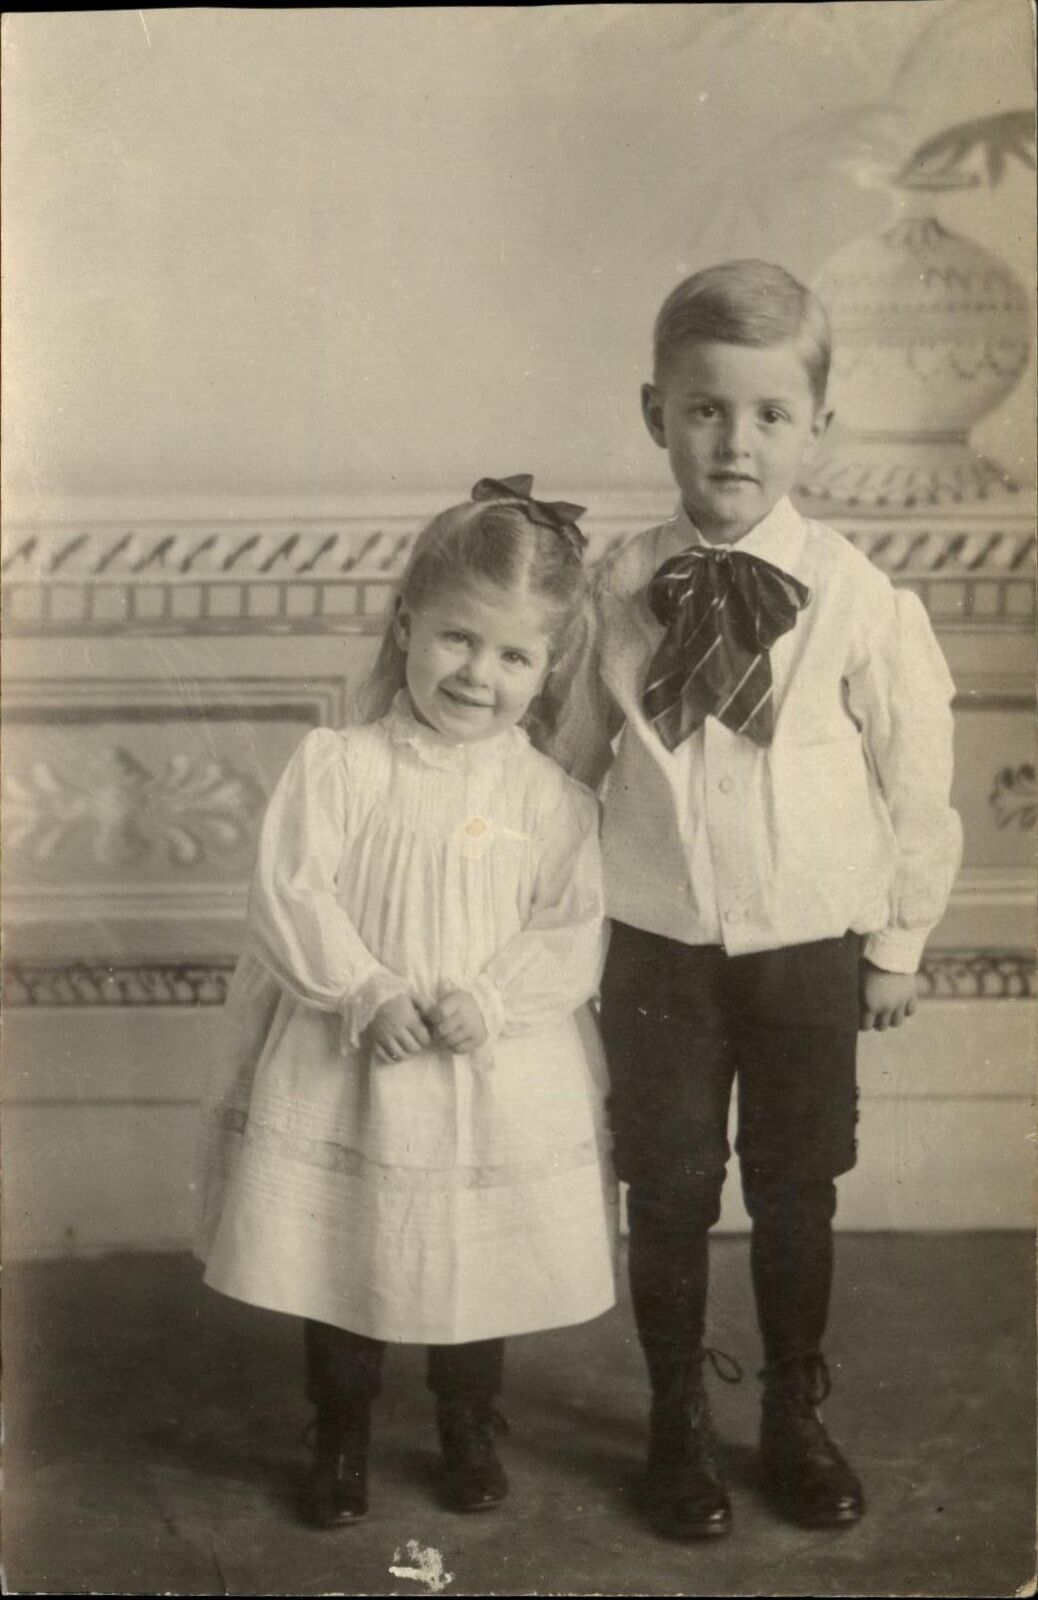 Adorable young girl & boy knickers tie puffy shirt ~ RPPC real photo 1904-1920s